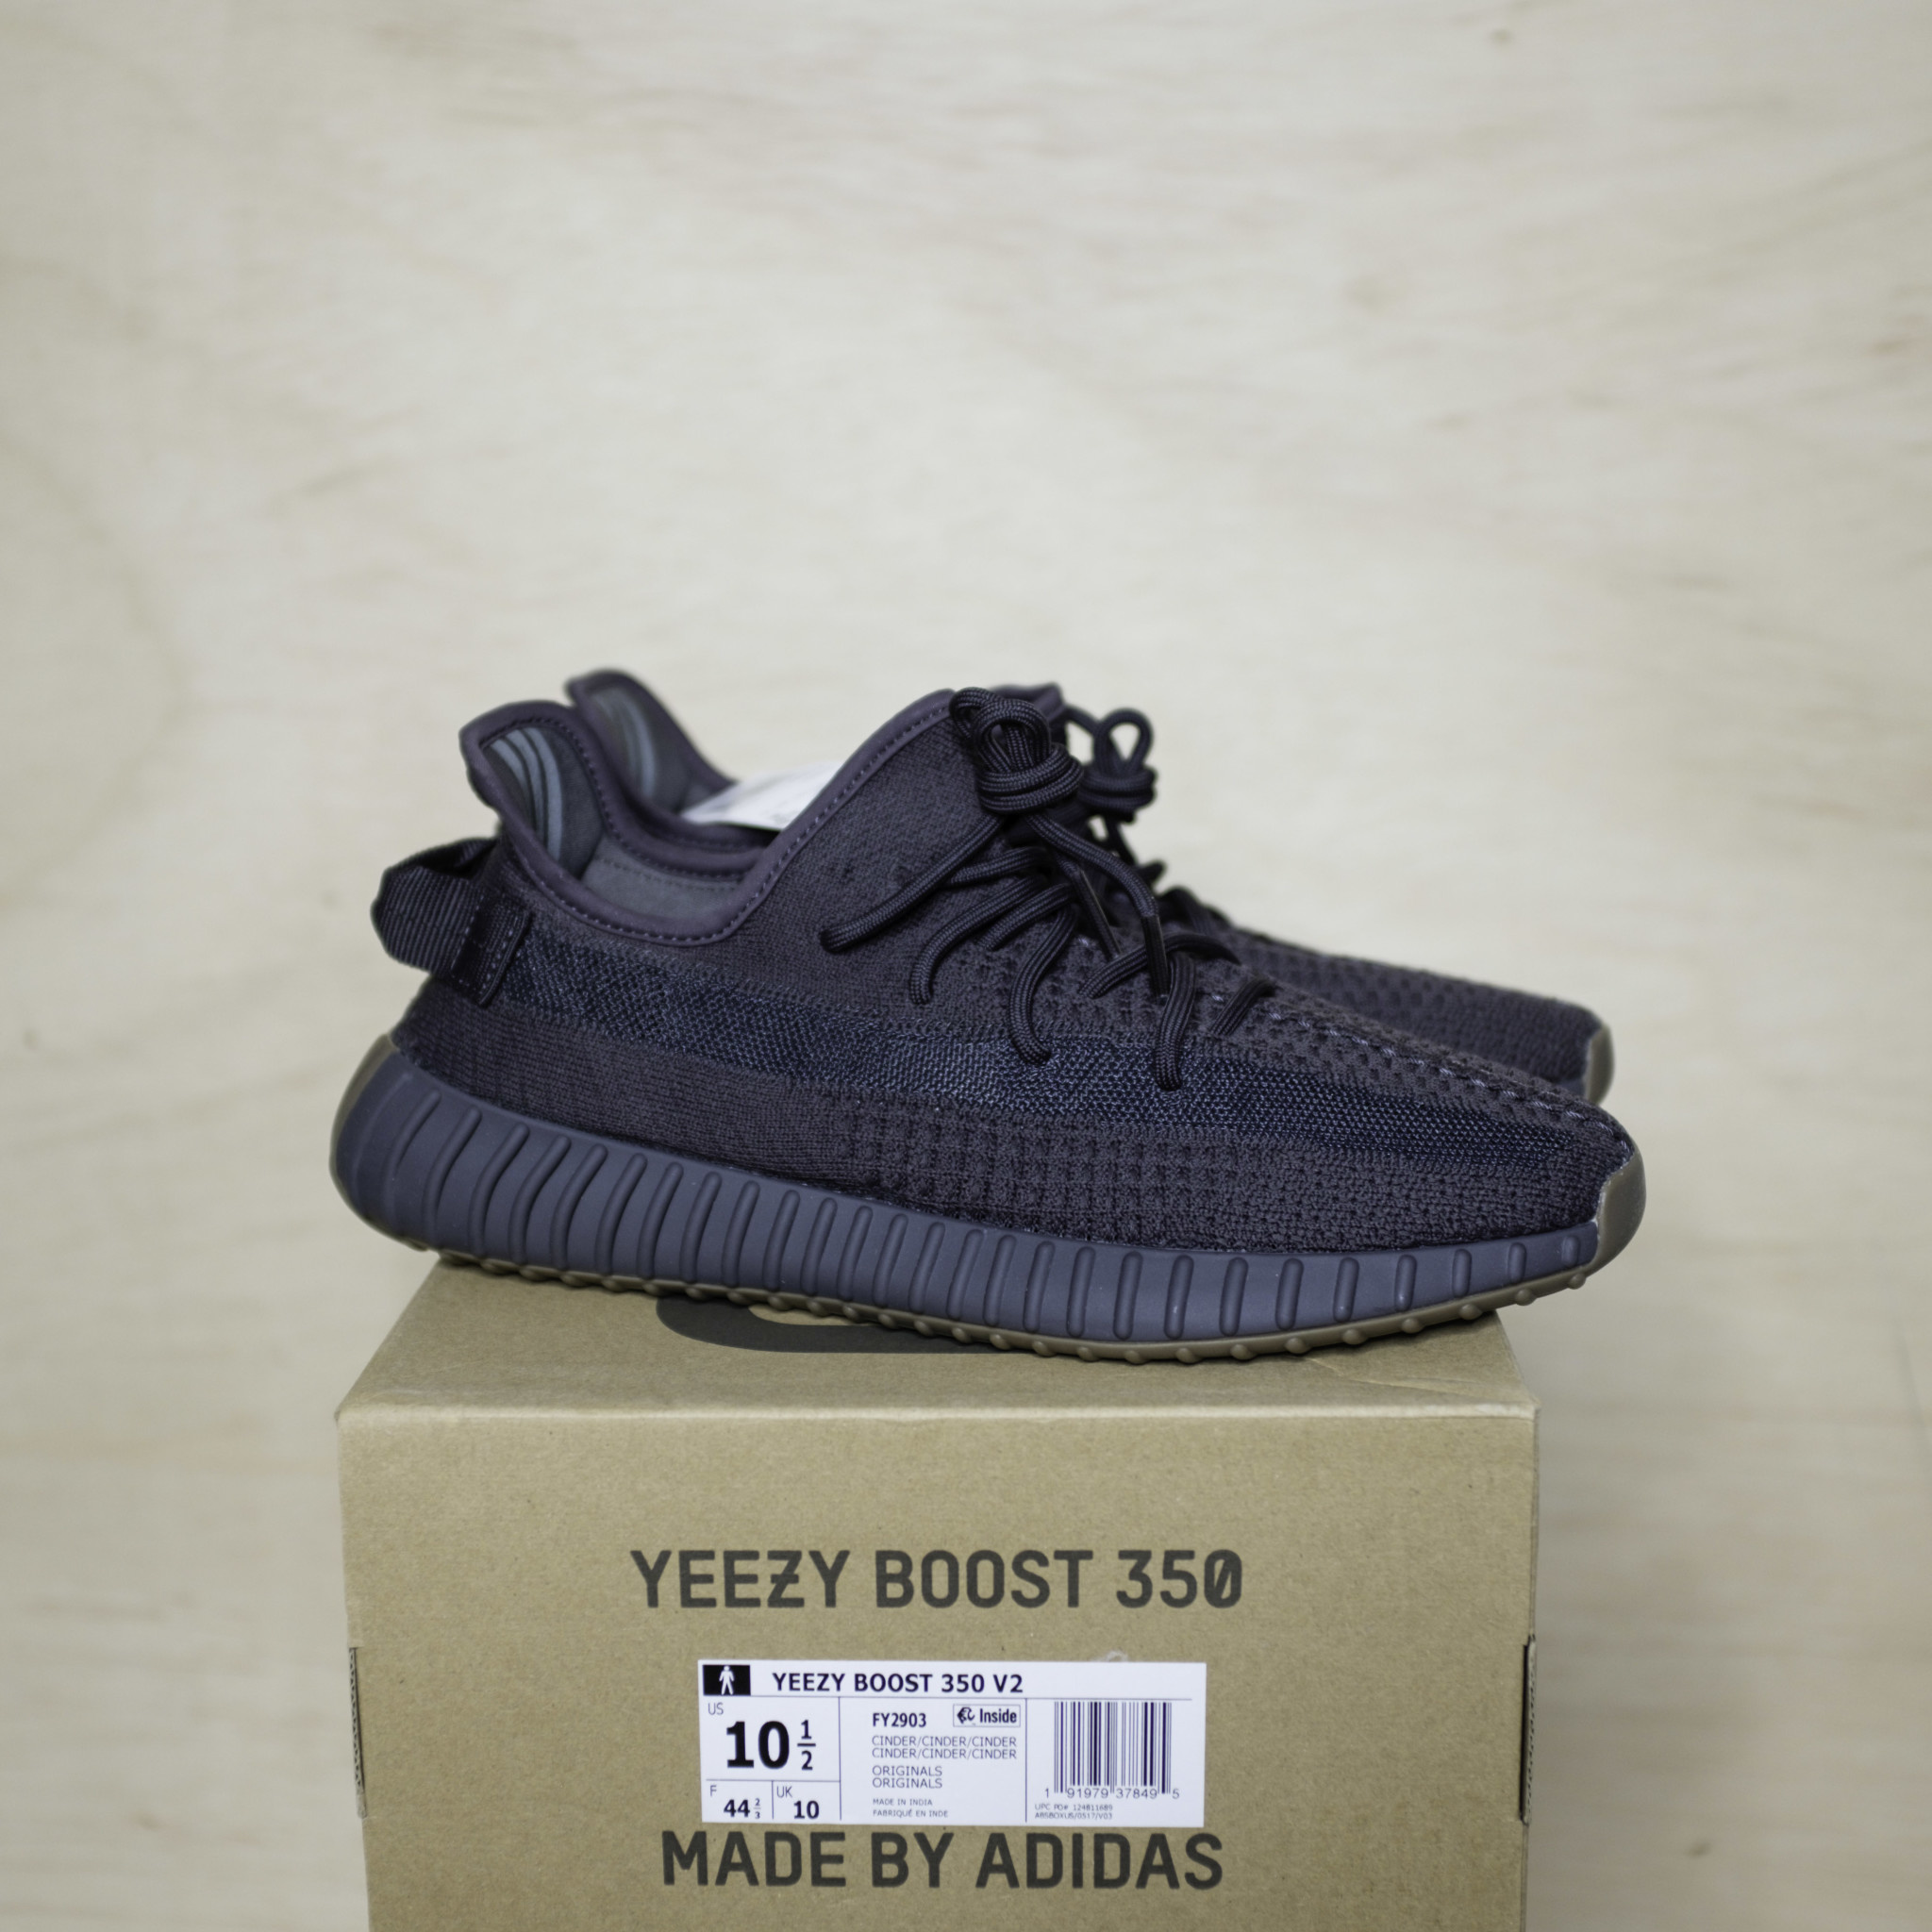 Adidas adidas Yeezy Boost 350 V2 Cinder Size 14, DS BRAND NEW - SoleSeattle